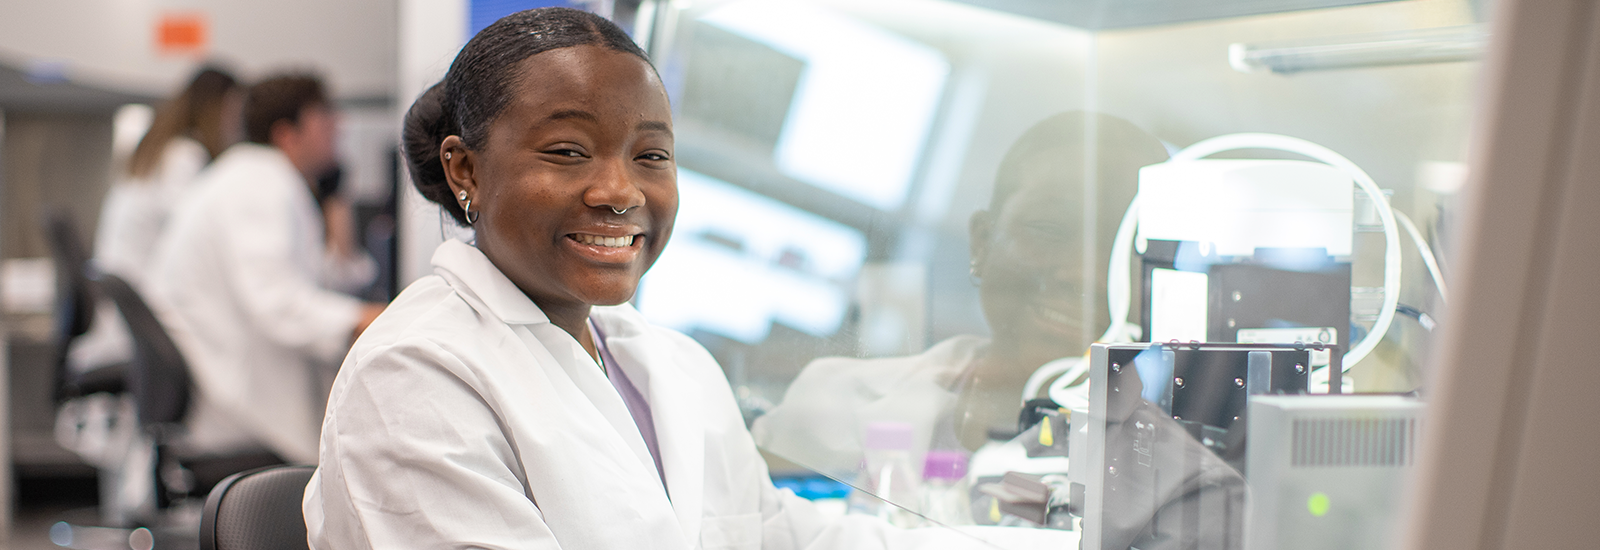 African American pharmacist in lab